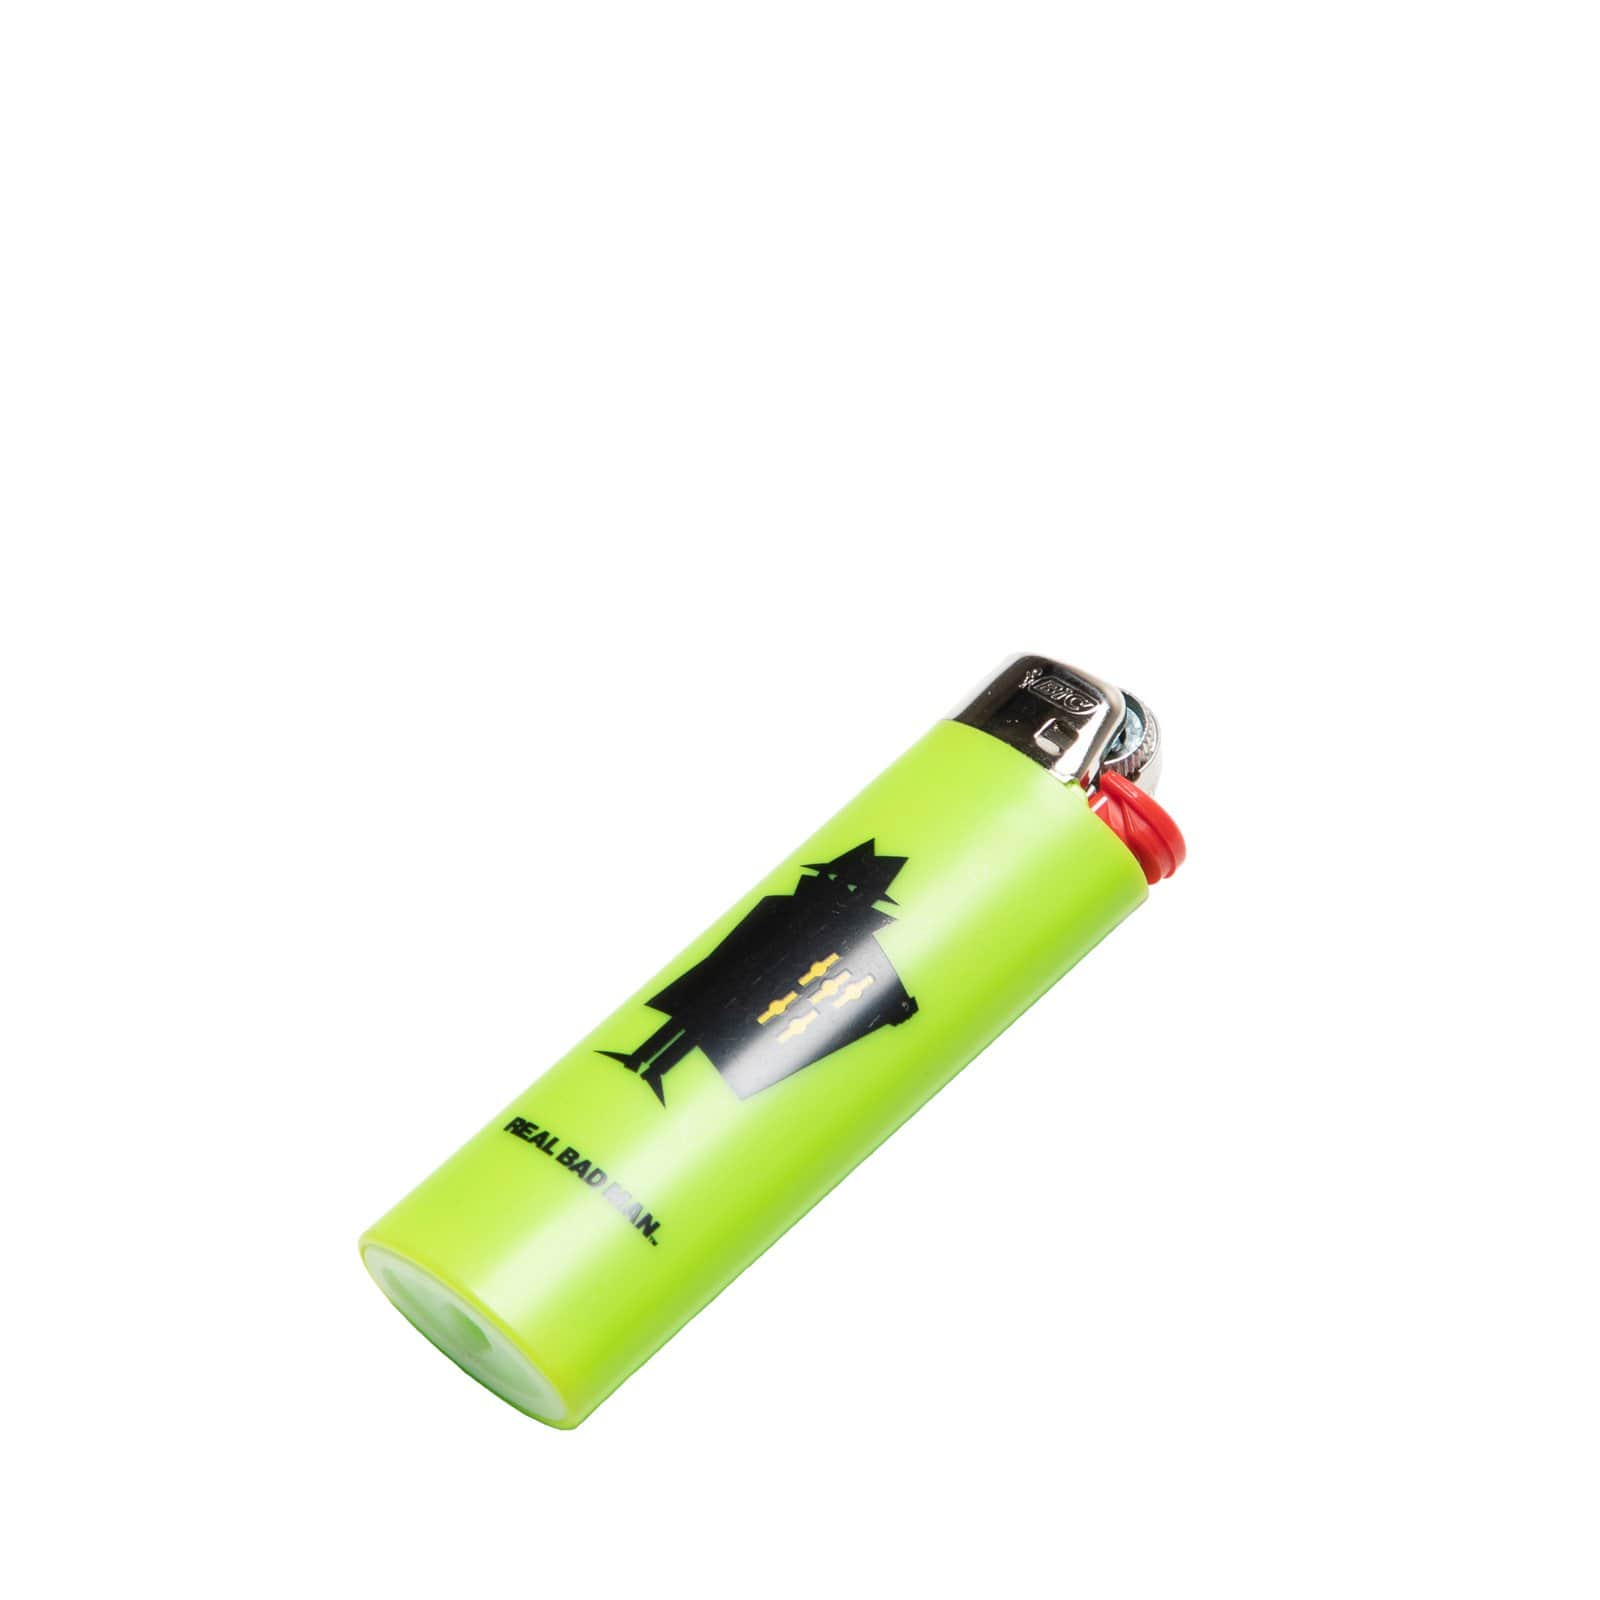 Real Bad Man Bags & Accessories LIME / O/S RBM BIC LIGHTER